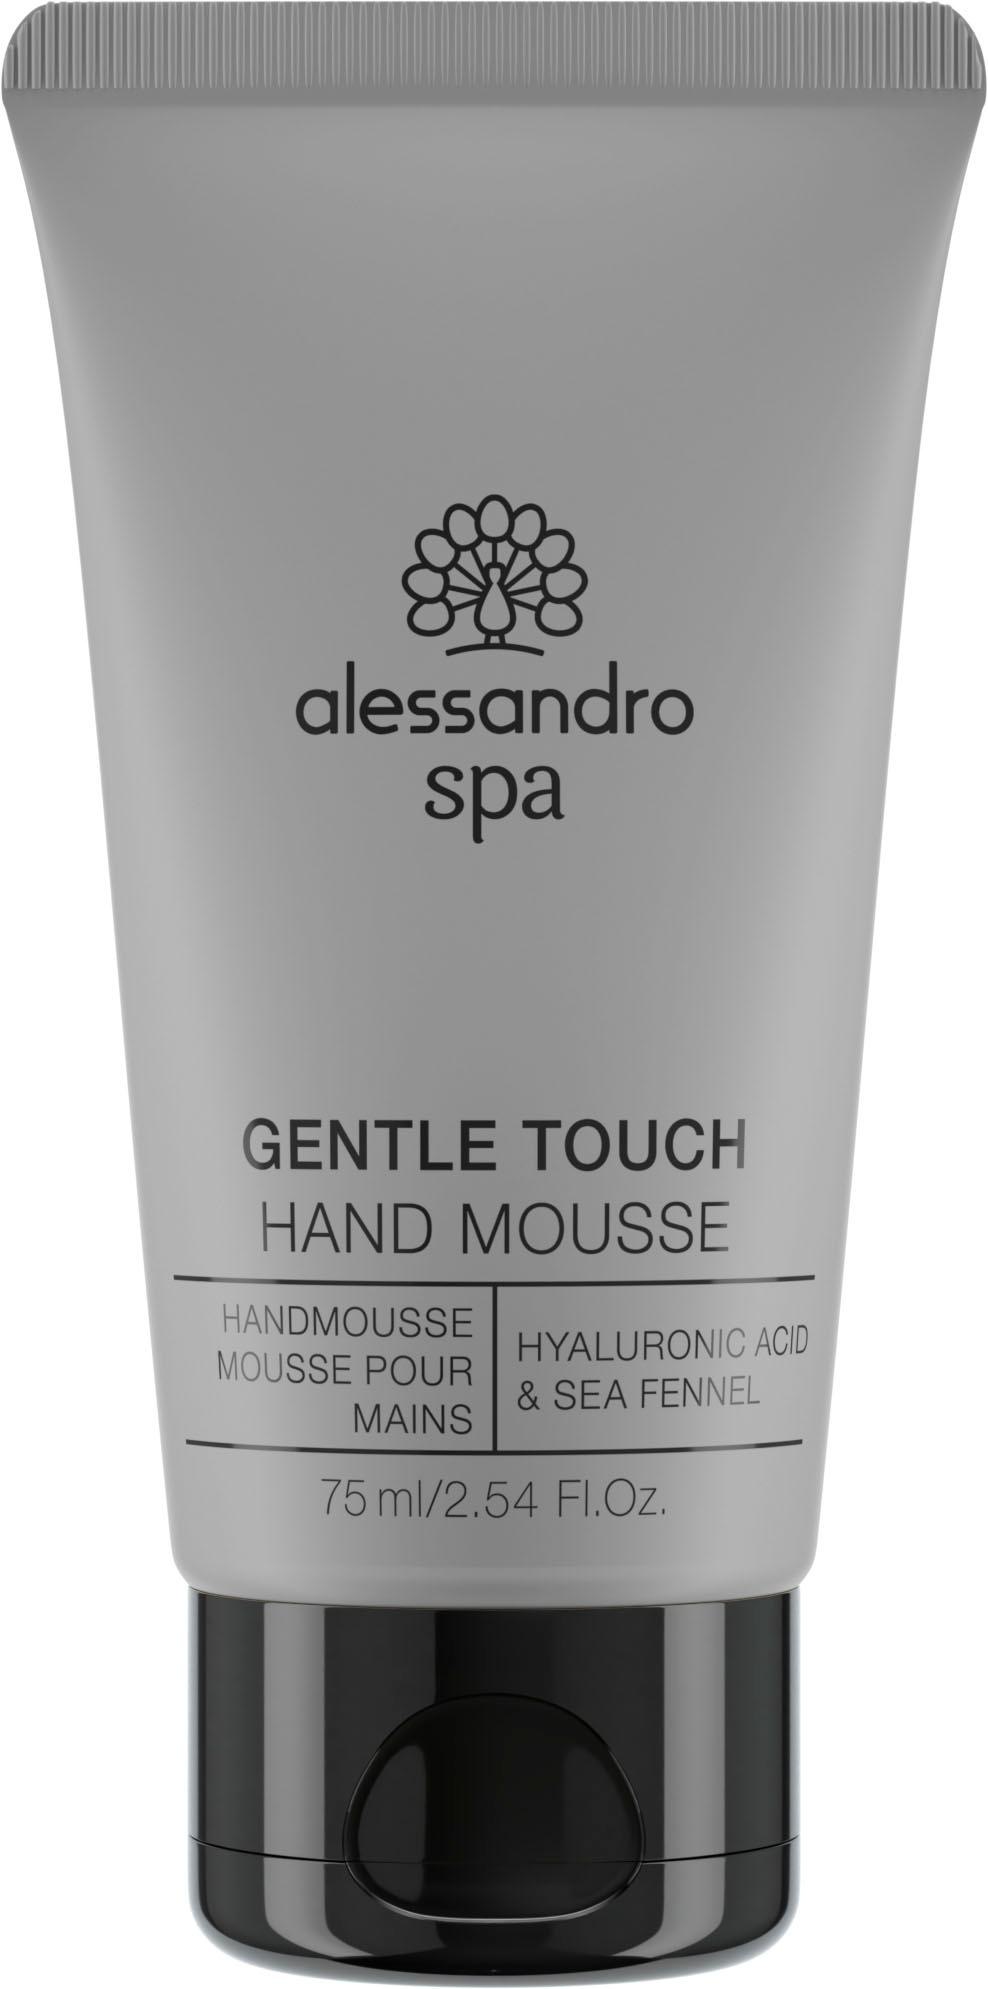 alessandro international Handmousse »SPA GENTLE TOUCH«